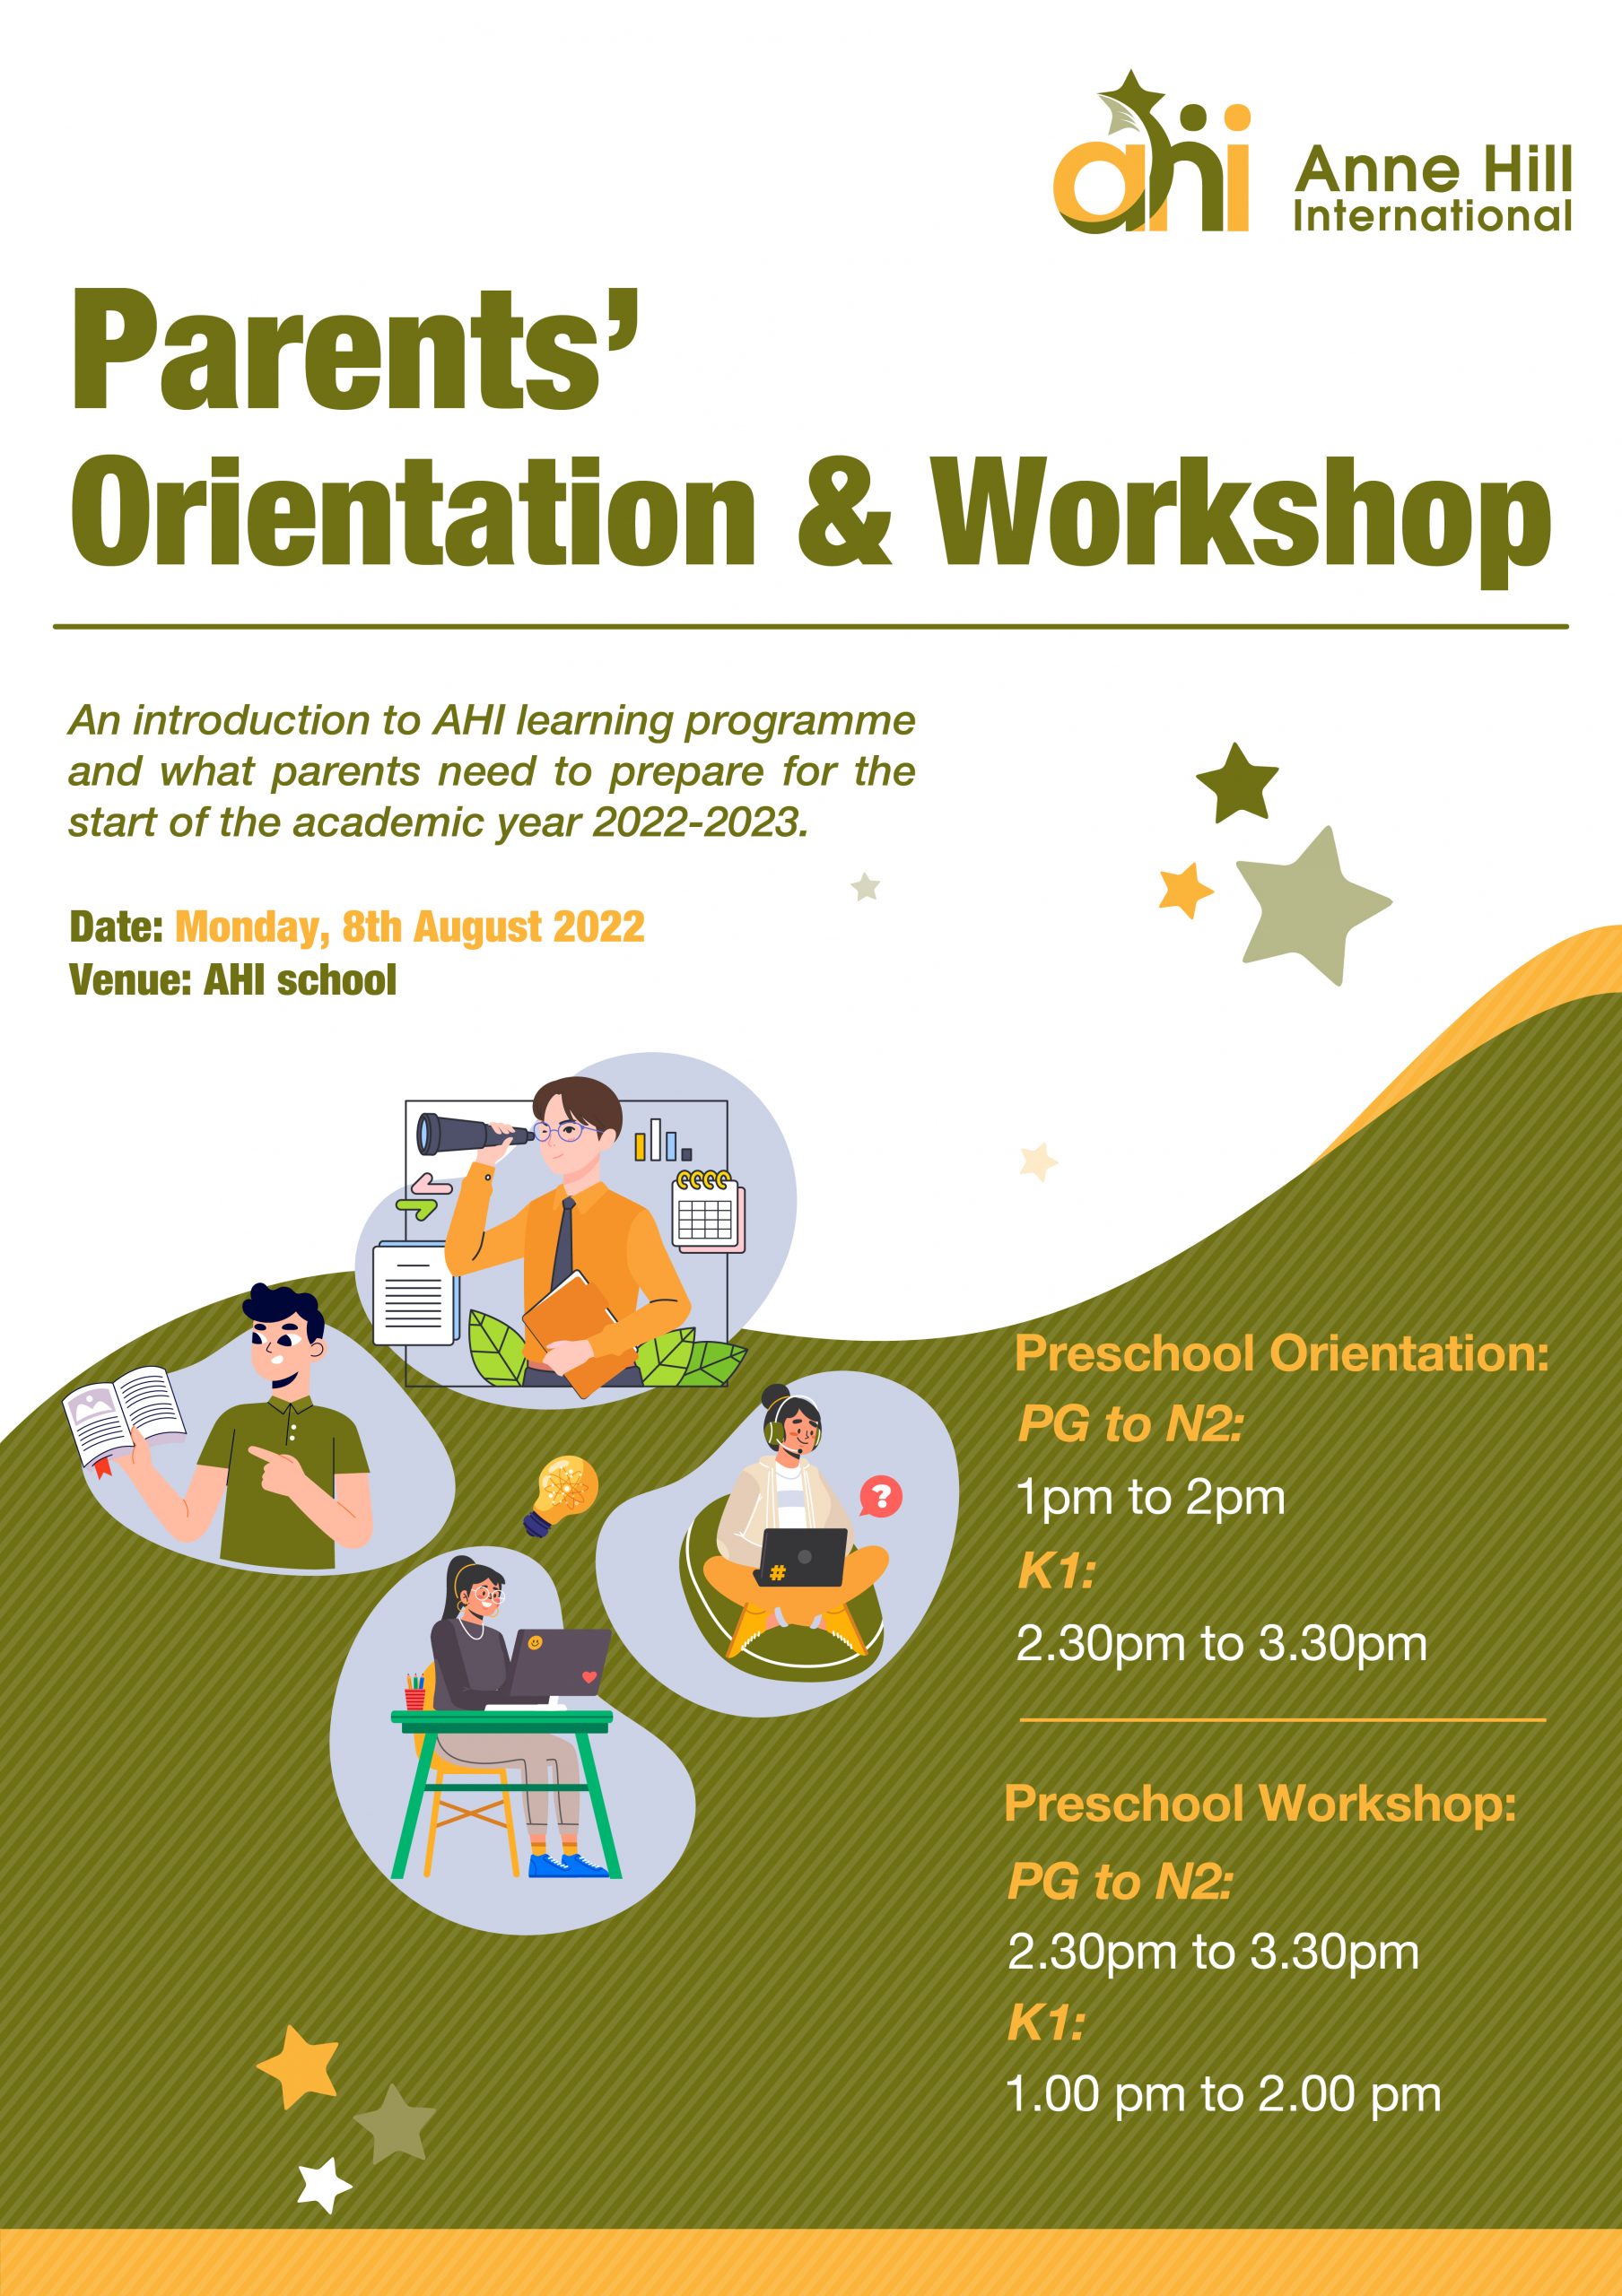 [PRESCHOOL STUDENTS] THE ORIENTATION AND WORKSHOP ON AUGUST 8TH